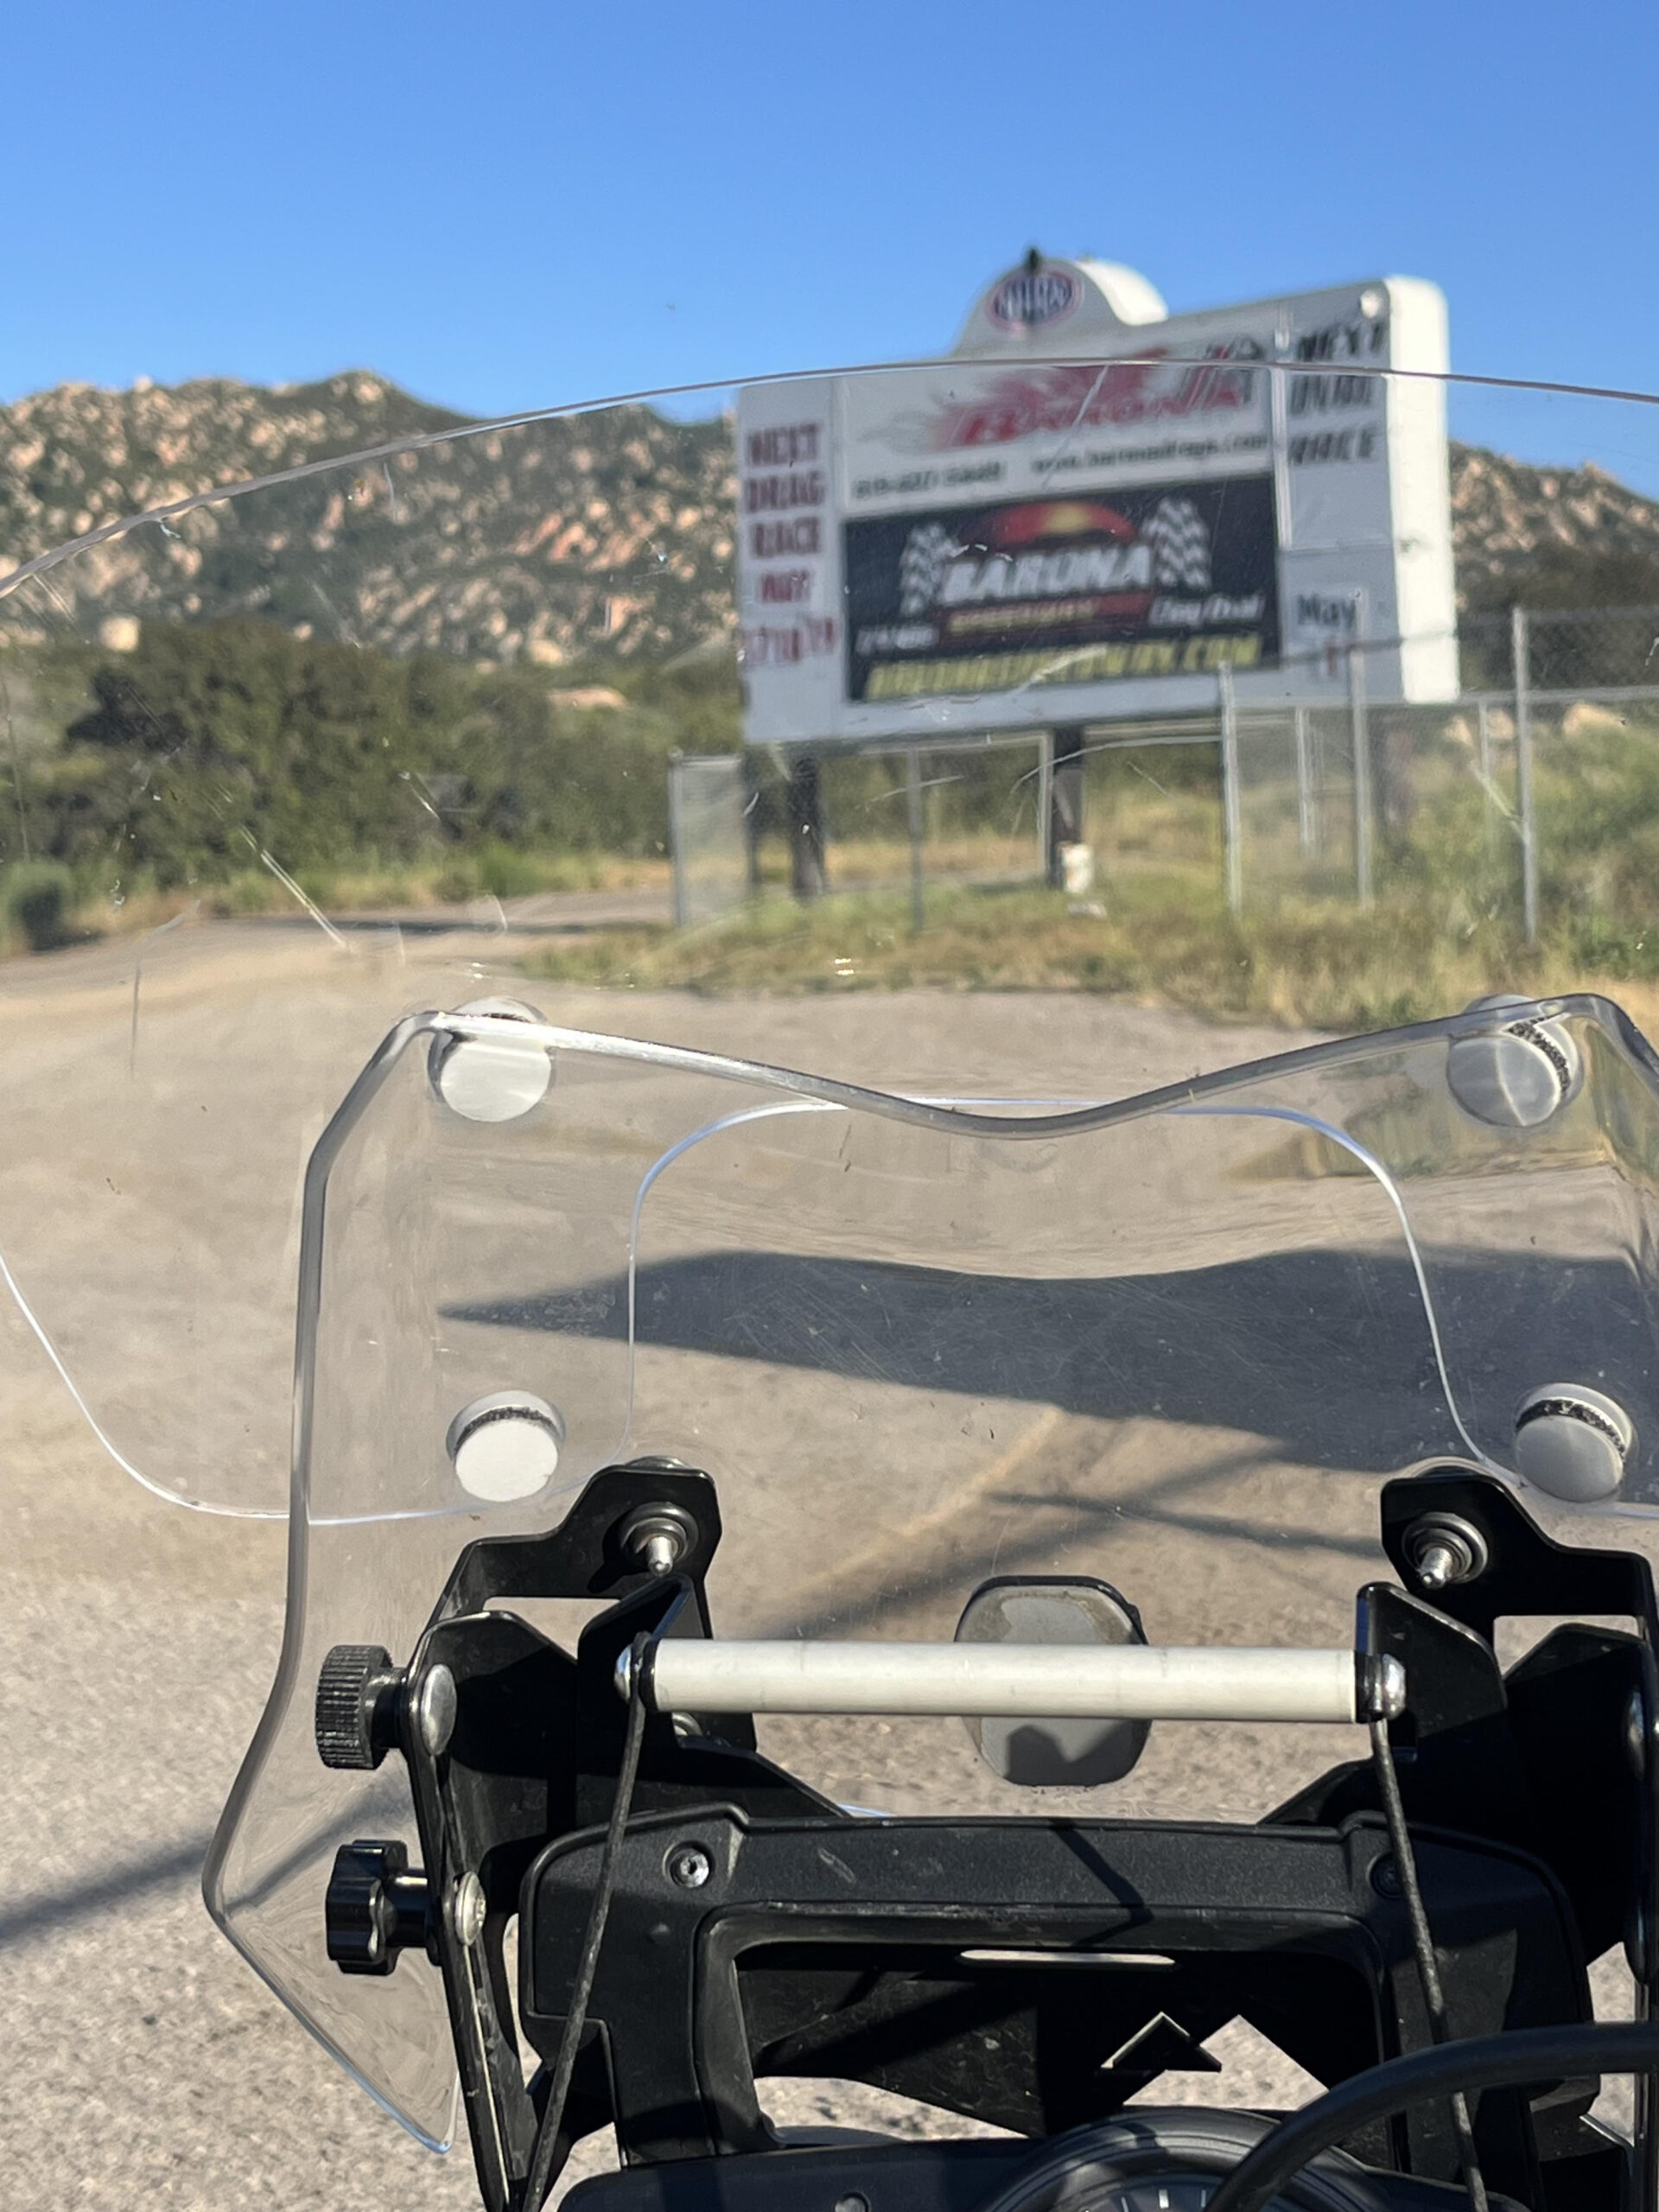 A motocross raceway sign seen through the windshield of a motorcycle in the San Diego mountains